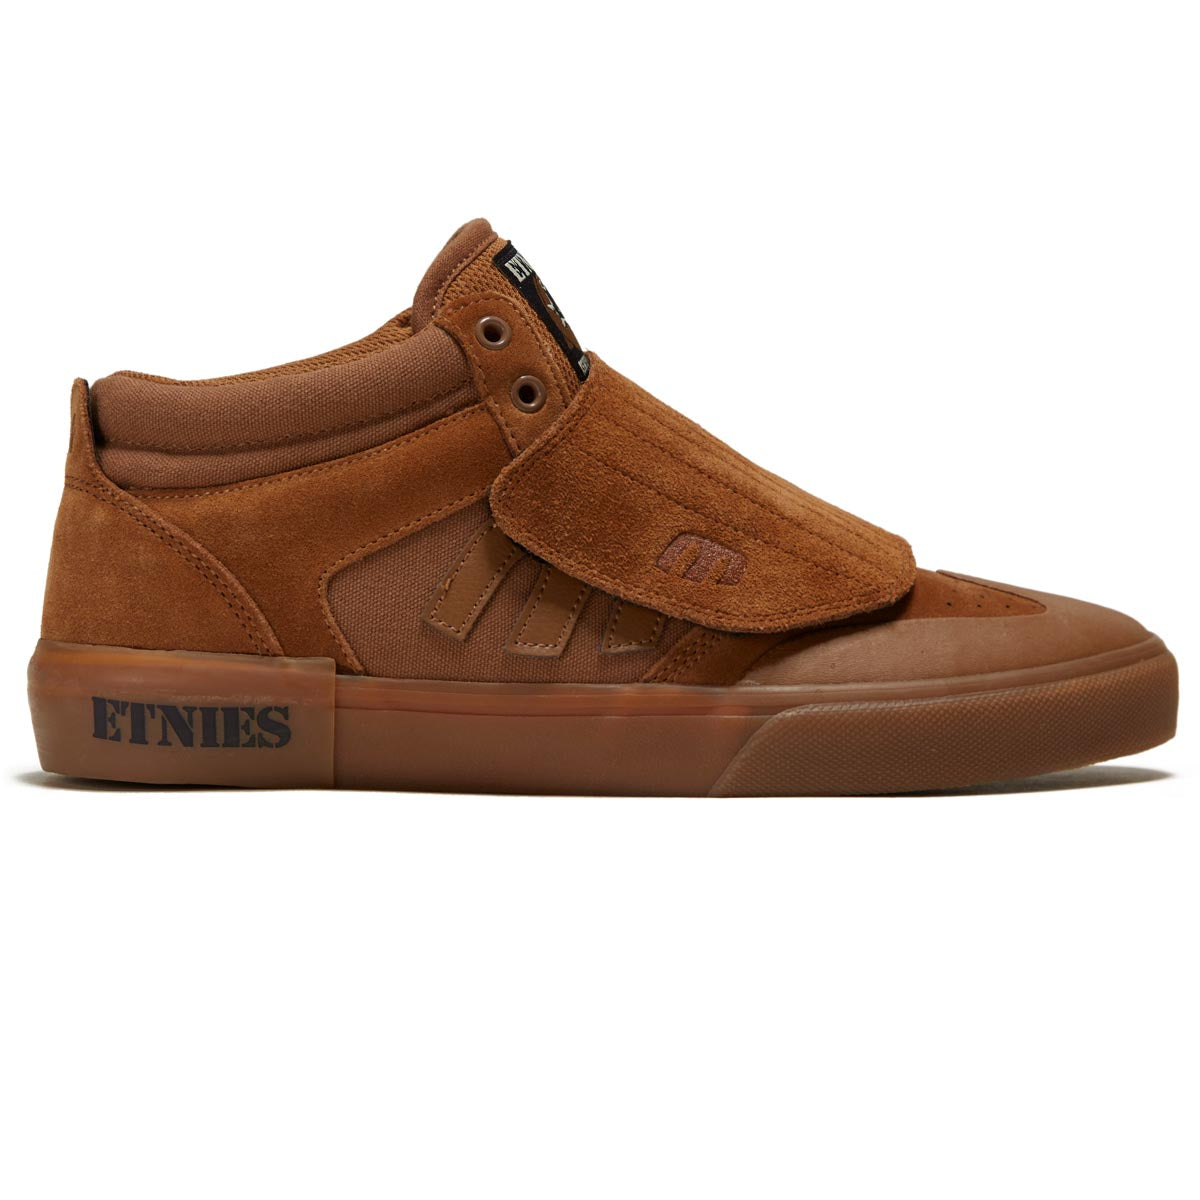 Etnies Windrow Vulc Mid Shoes - Brown/Gum image 1